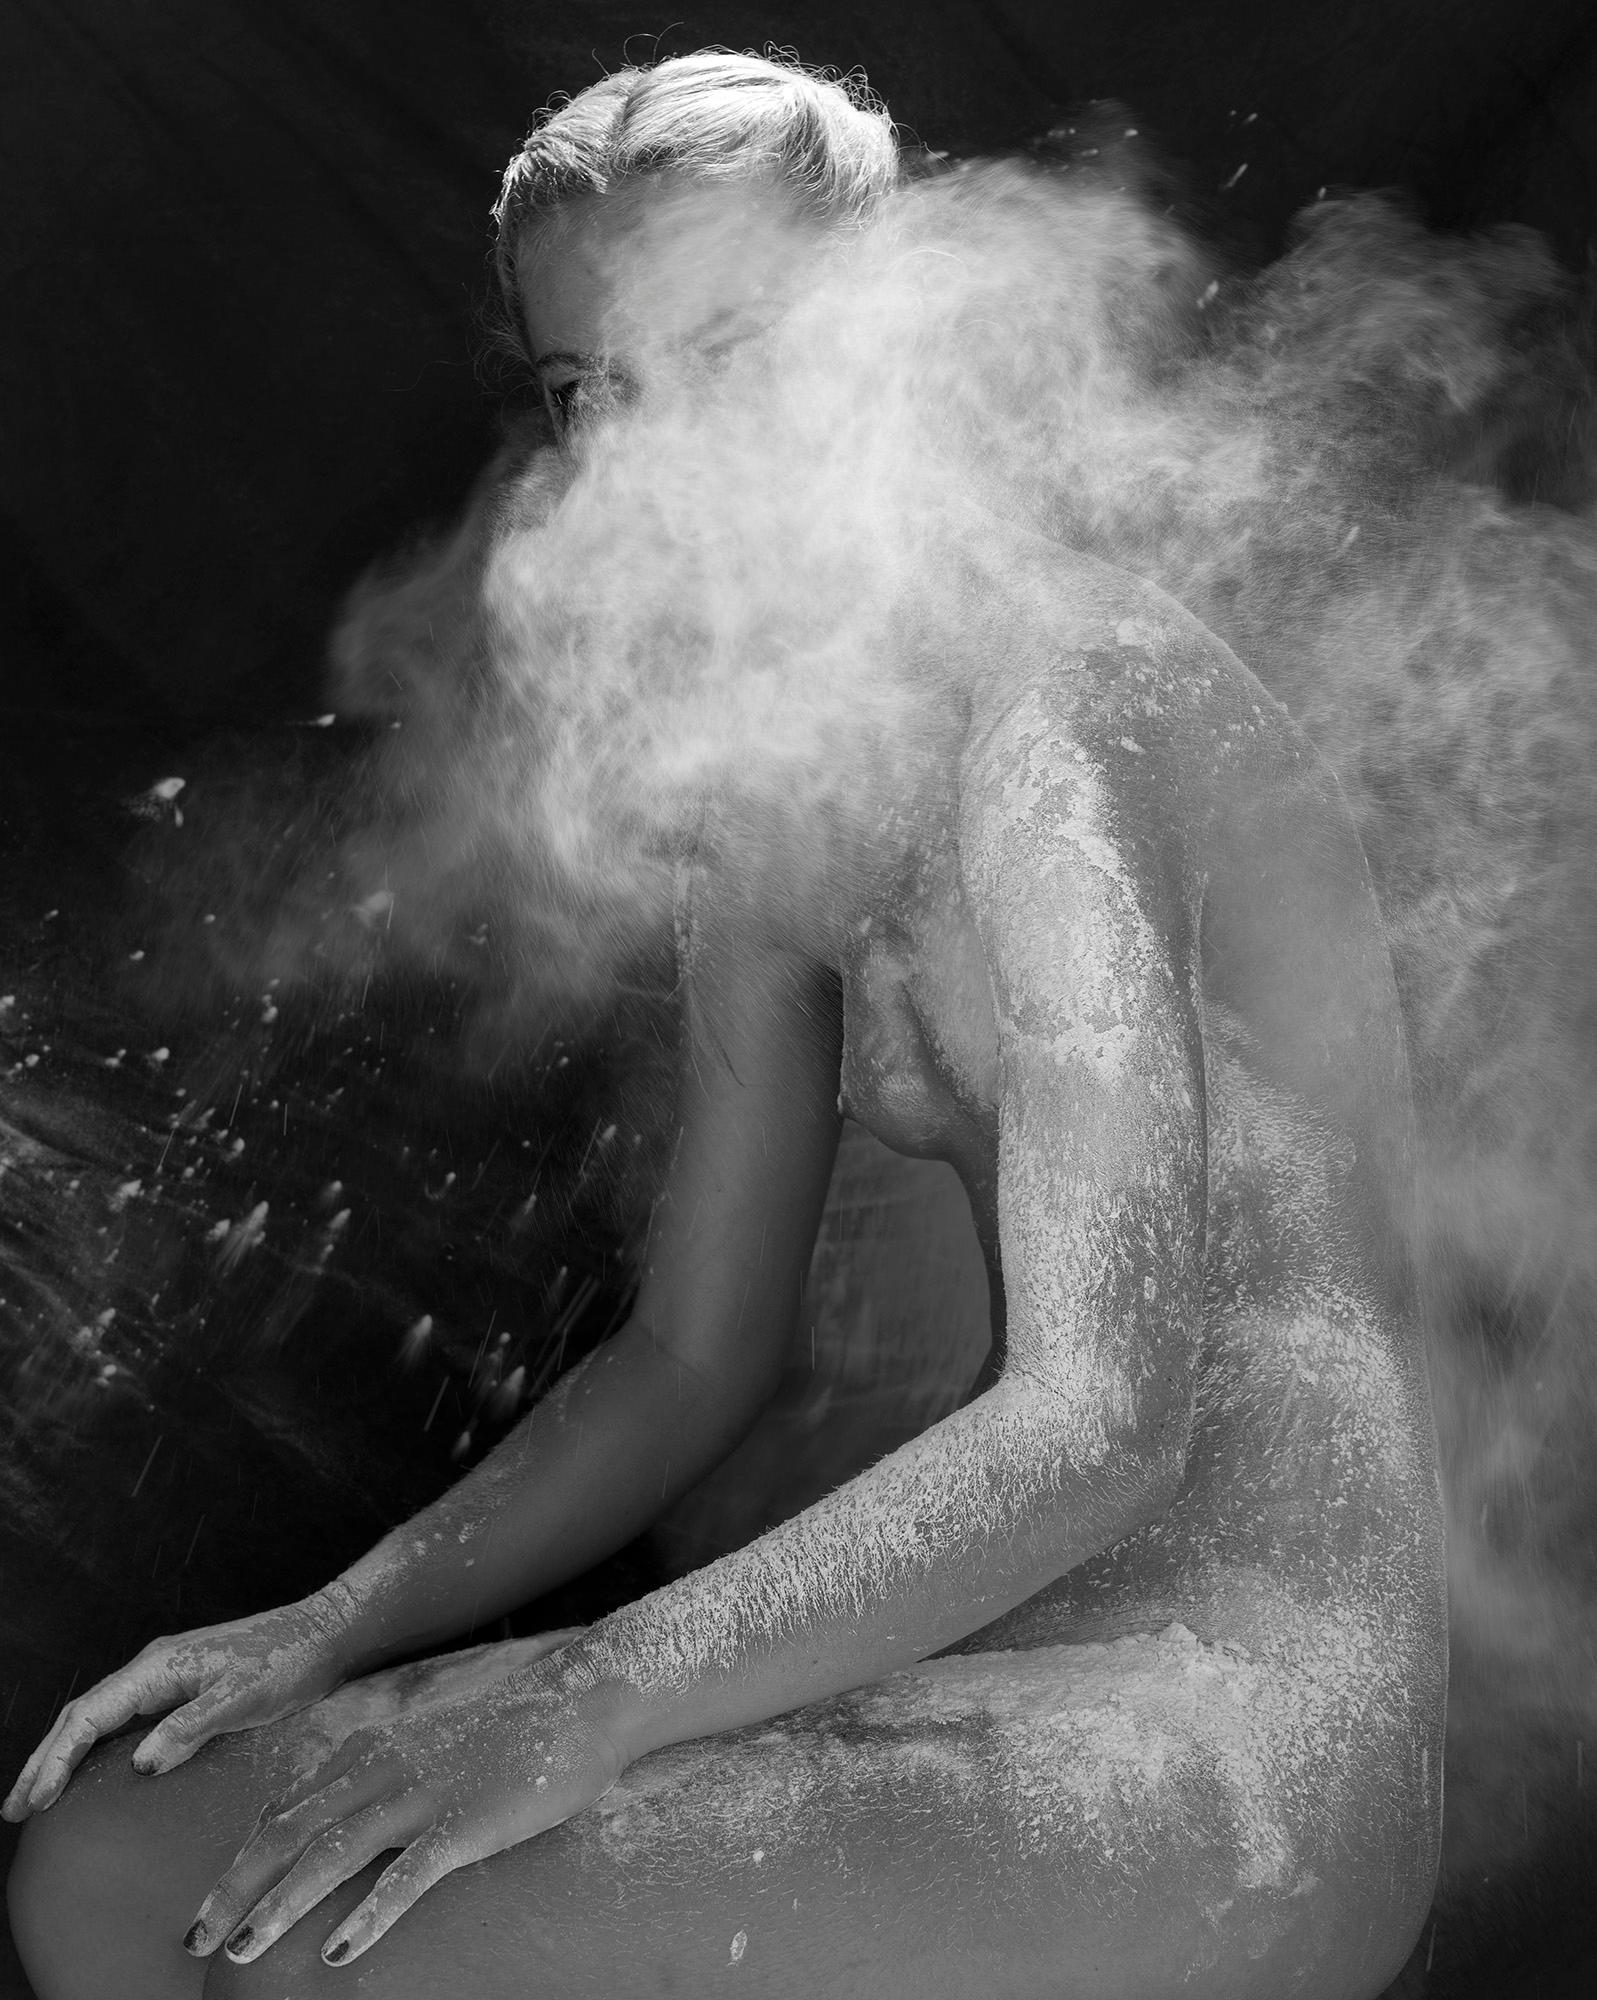 Leila in the cloud, 21st century, contemporary, photography